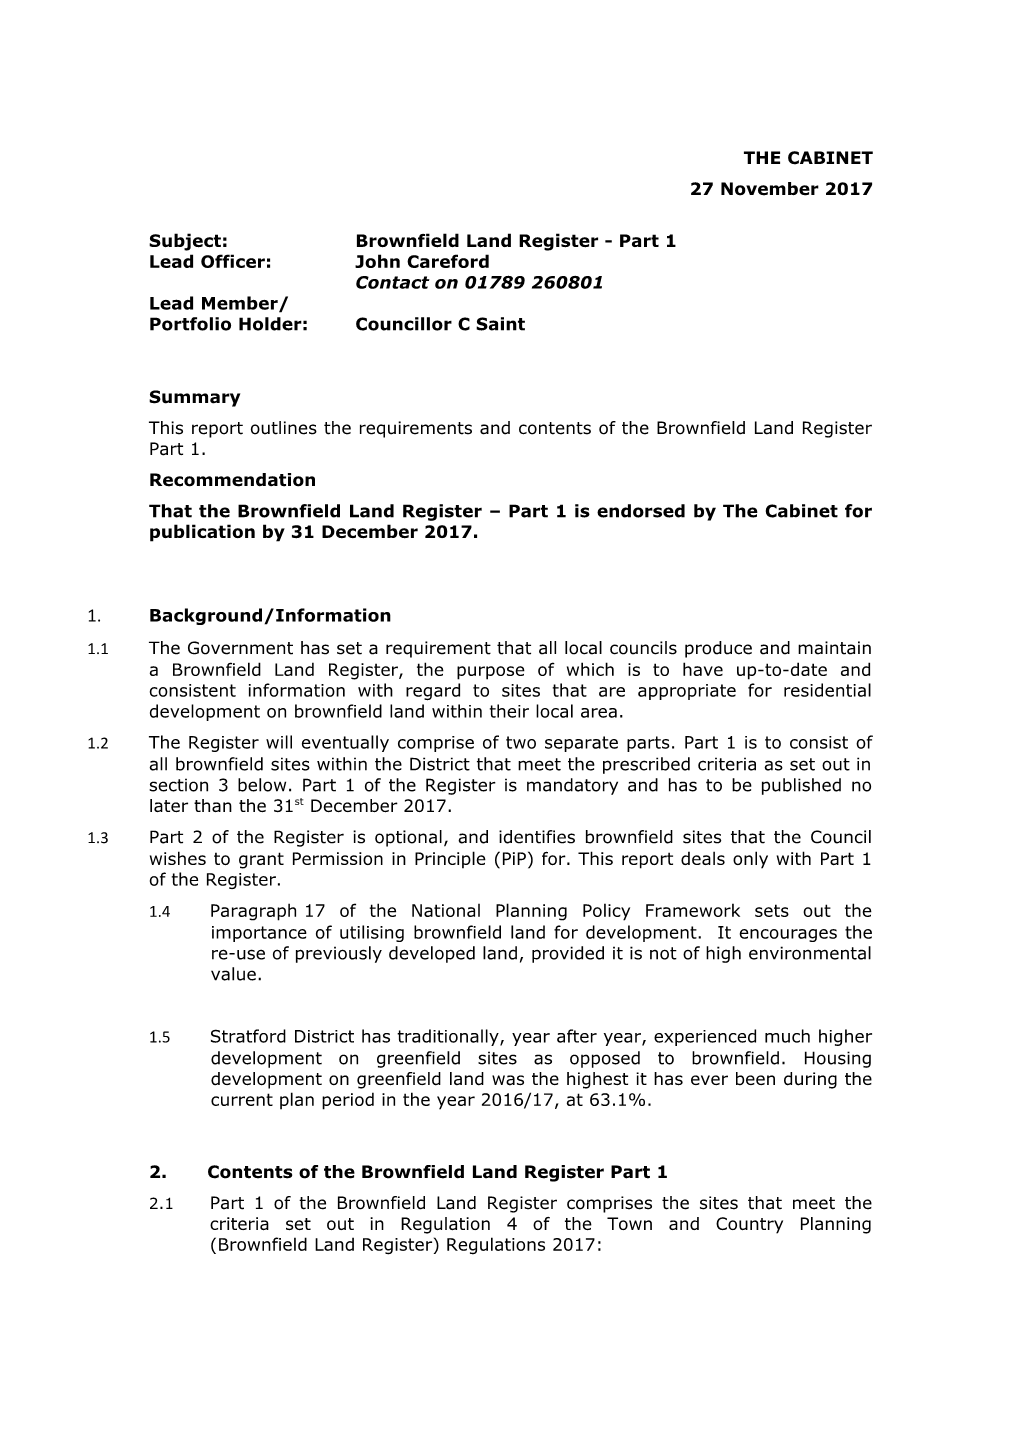 Subject:Brownfield Land Register- Part 1